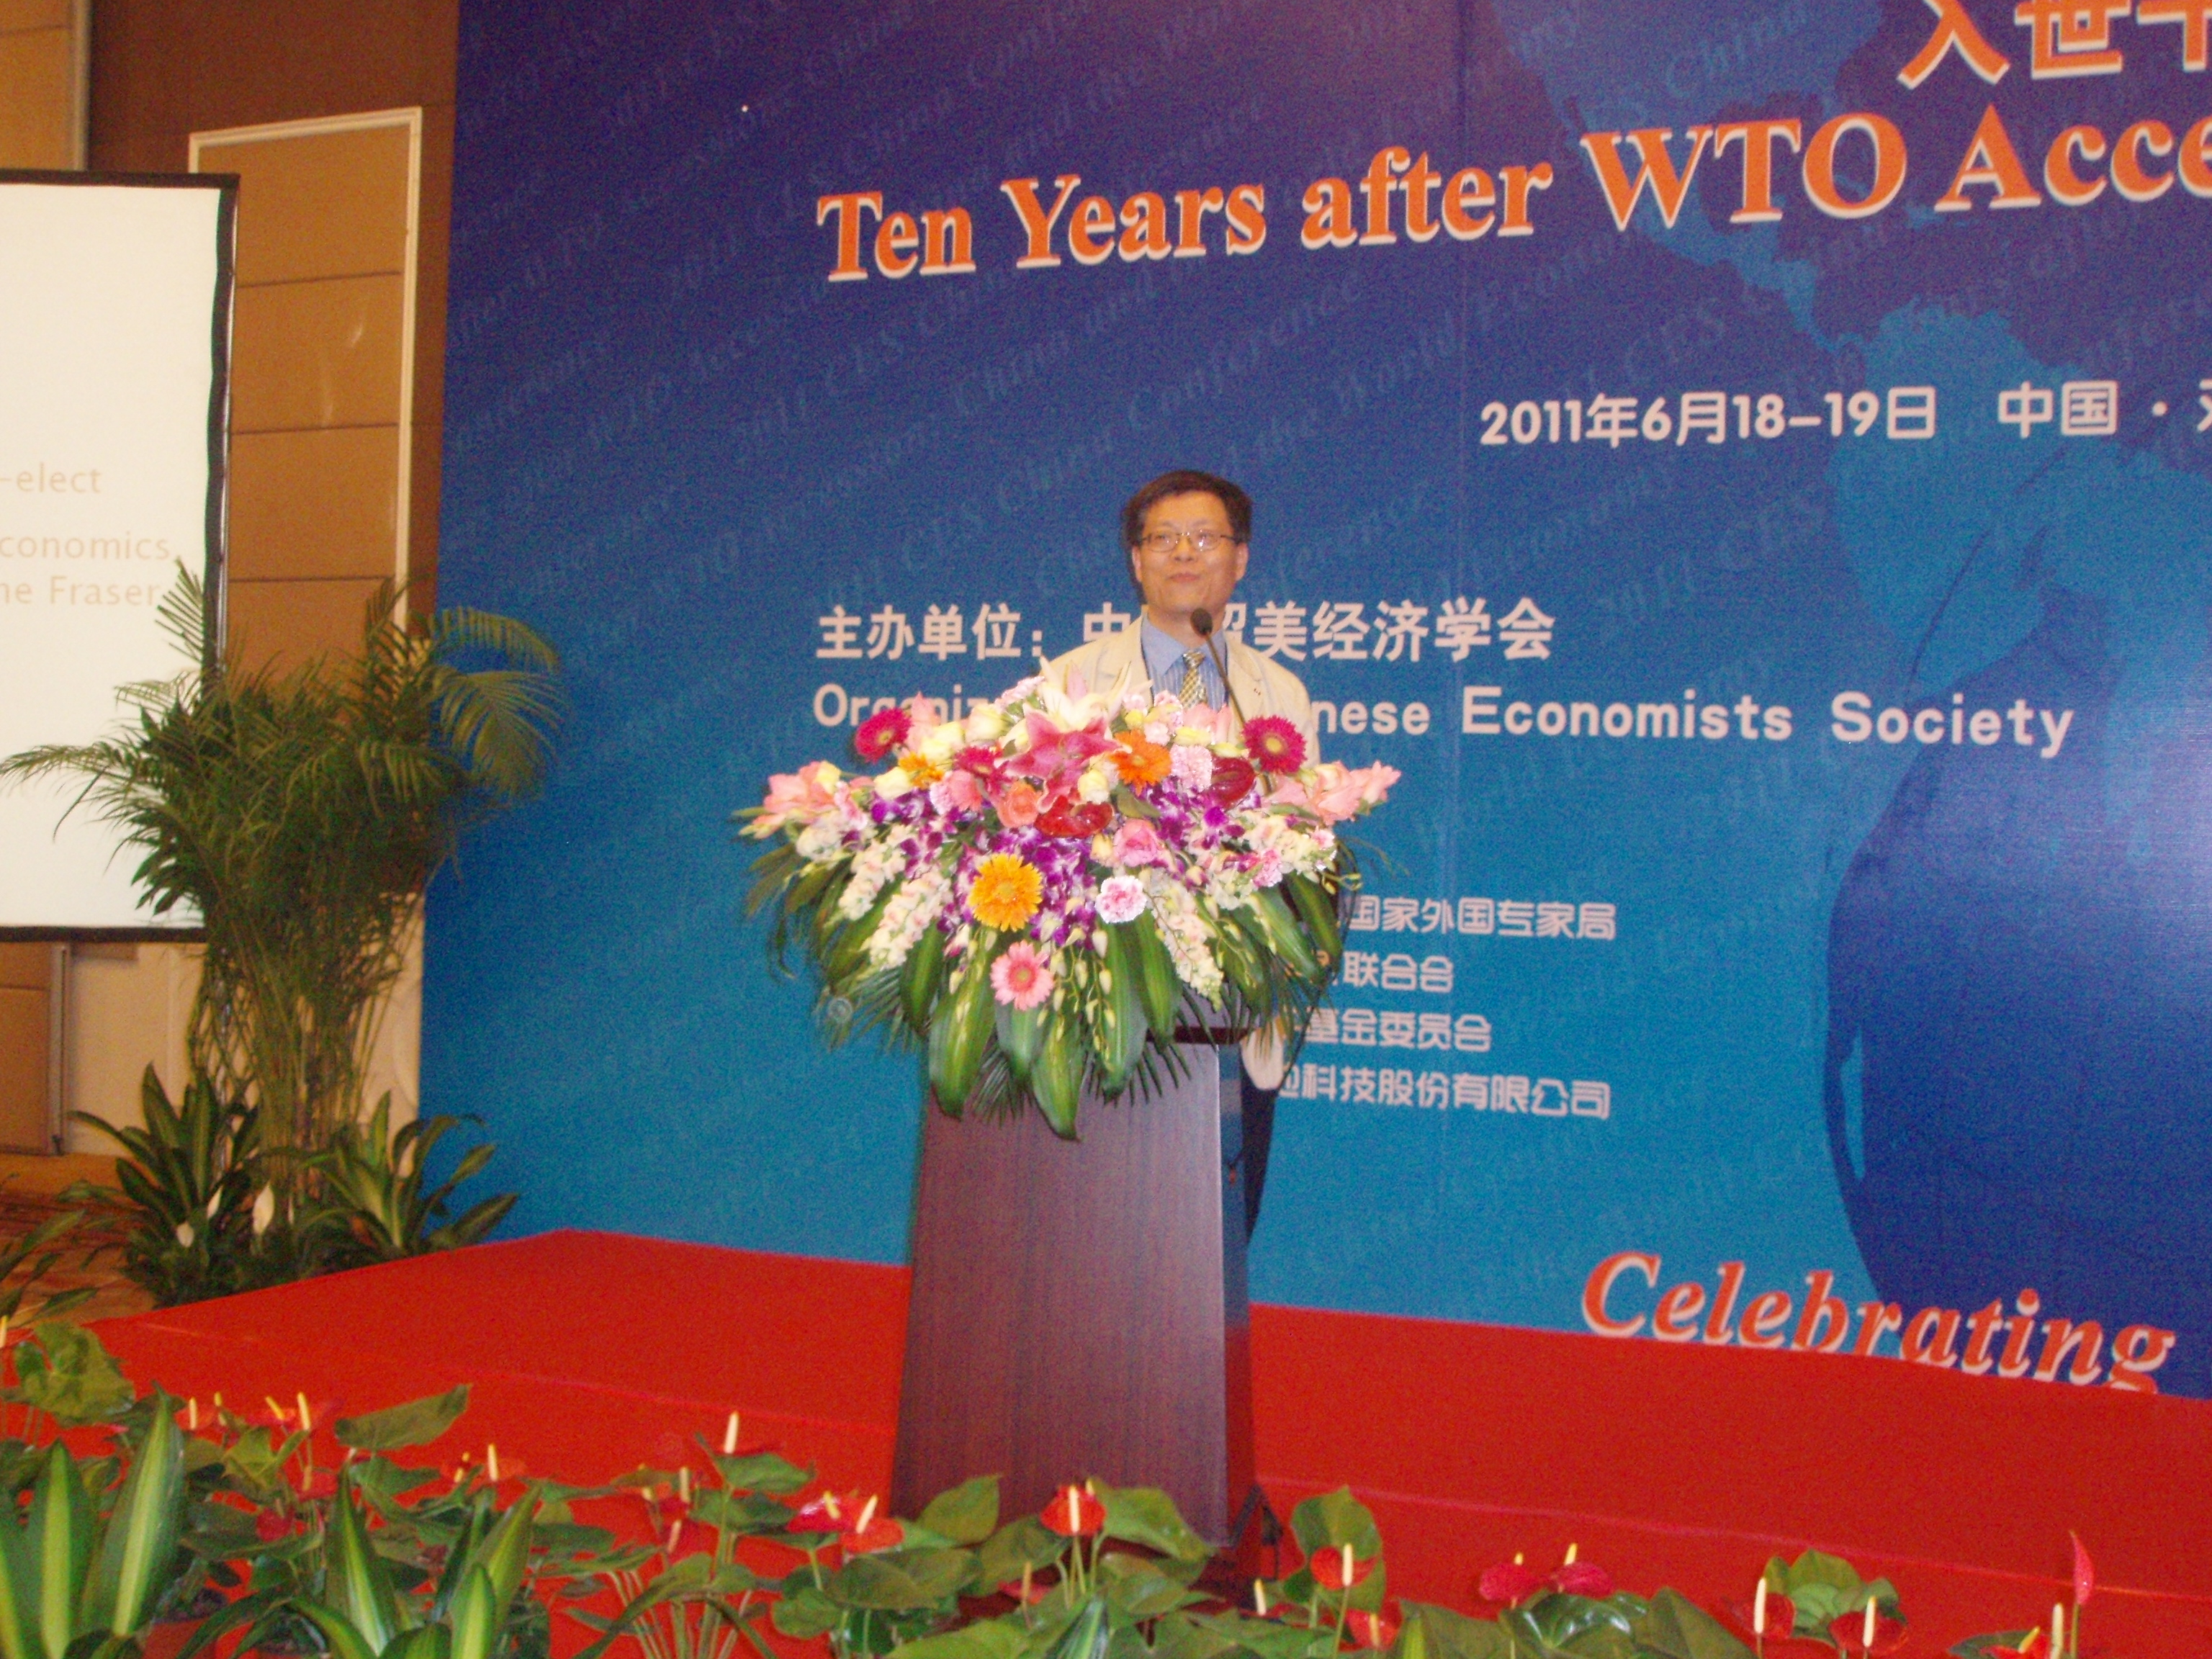 President-elect Ding Lu at Closing Ceremony